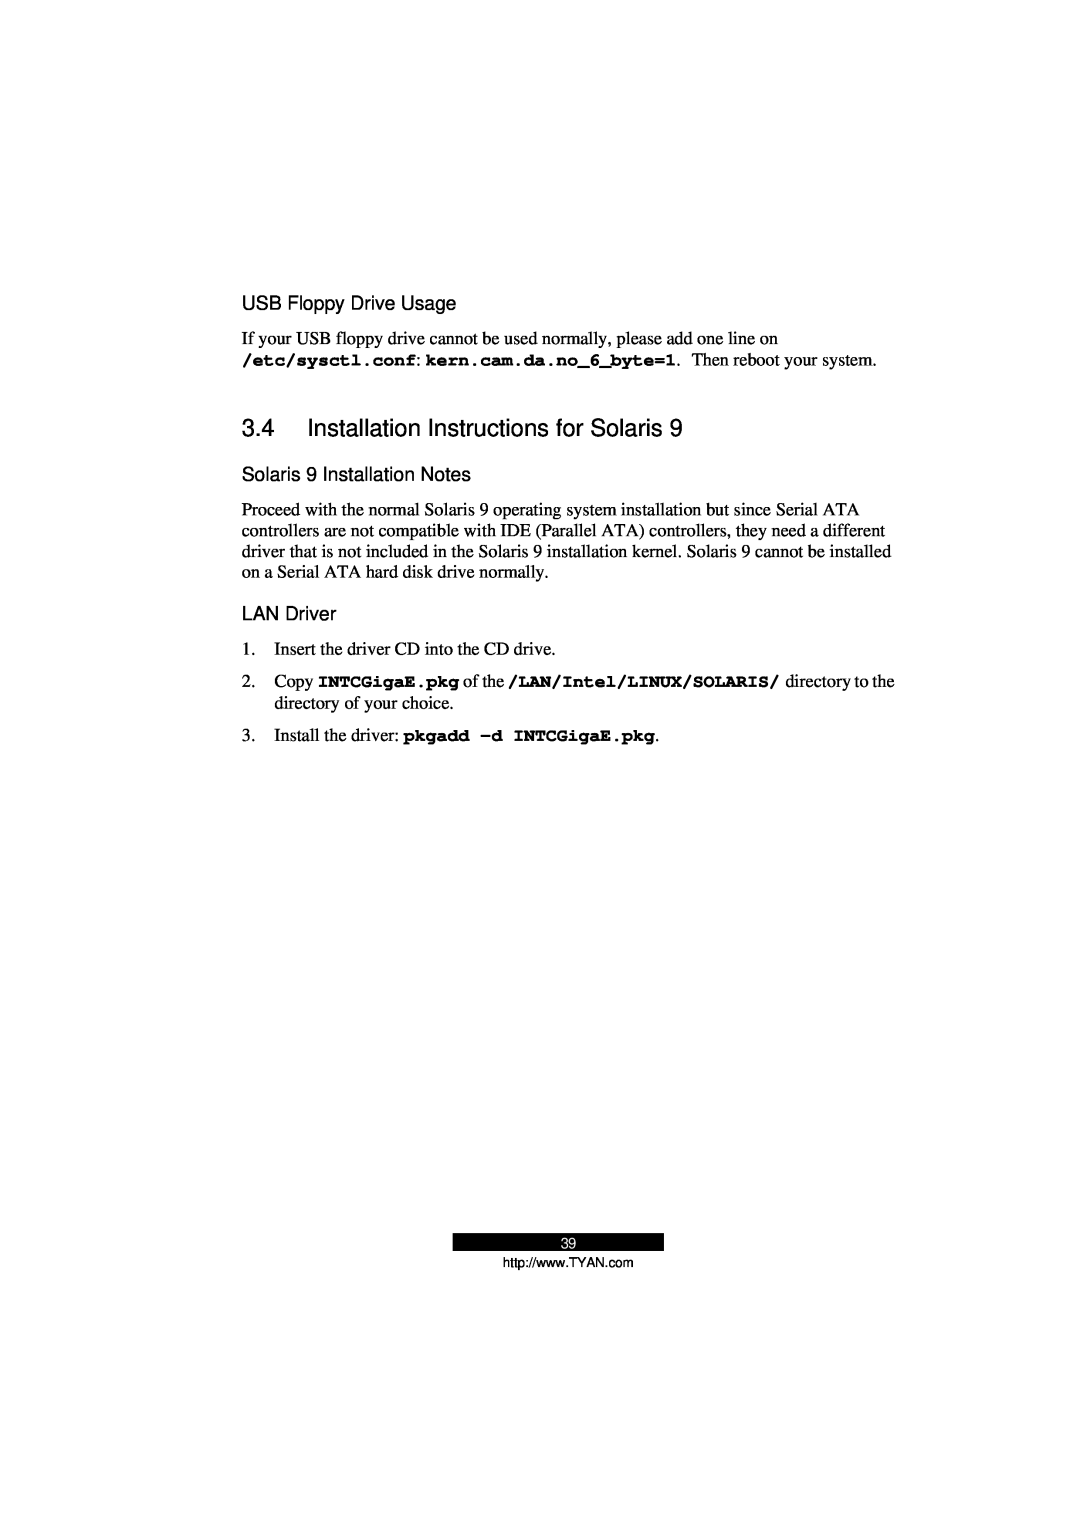 Tyan Computer B5103G12S2 manual Installation Instructions for Solaris, USB Floppy Drive Usage, Solaris 9 Installation Notes 